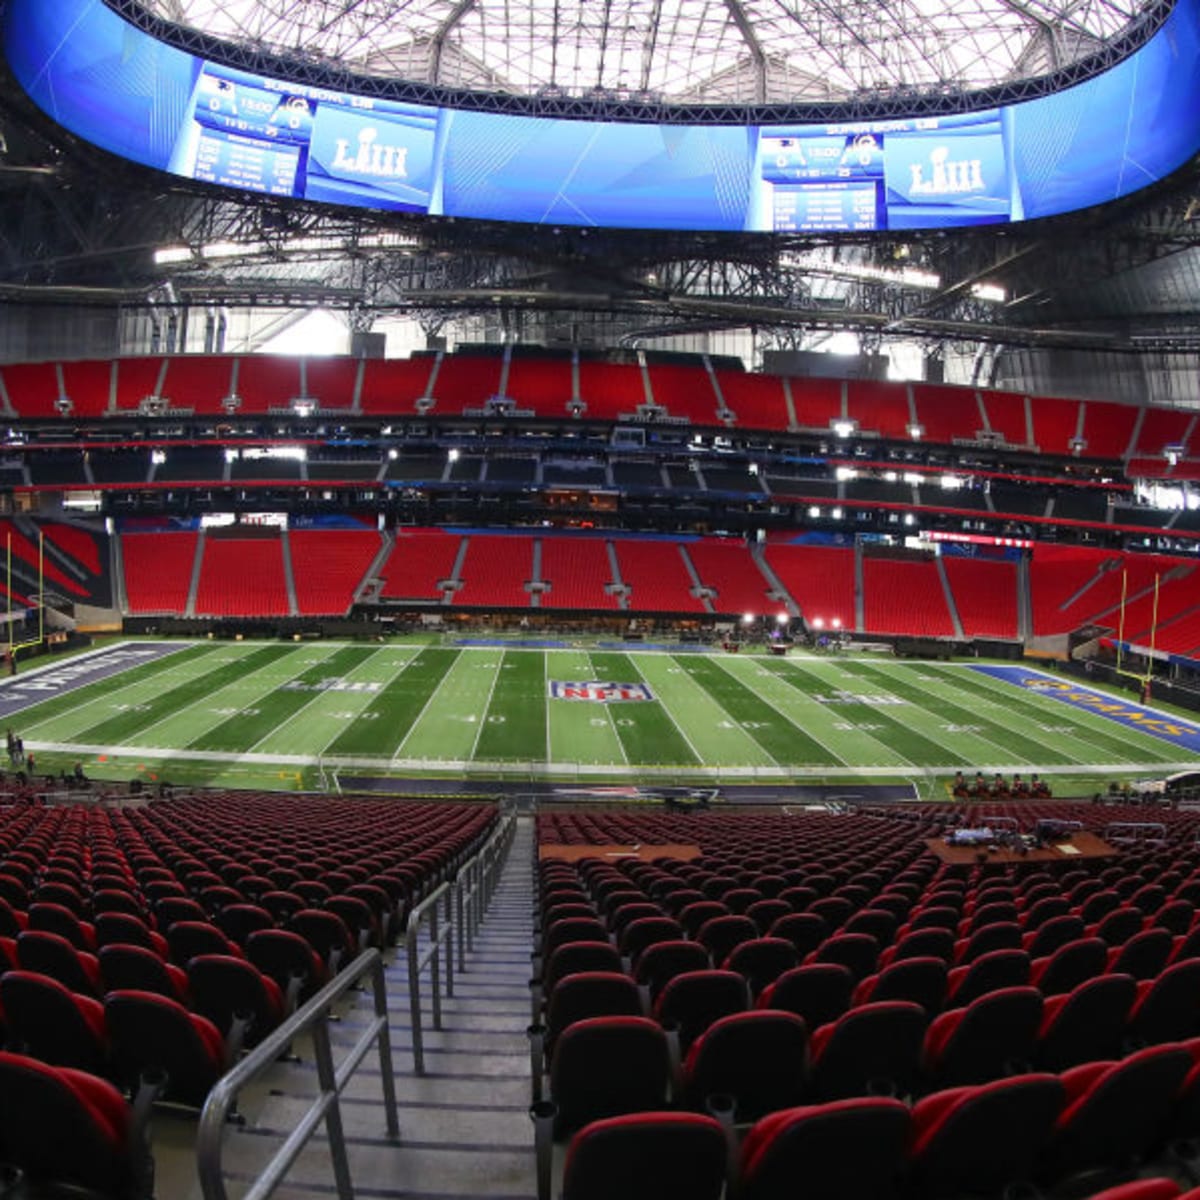 How much do 2019 Super Bowl tickets cost?